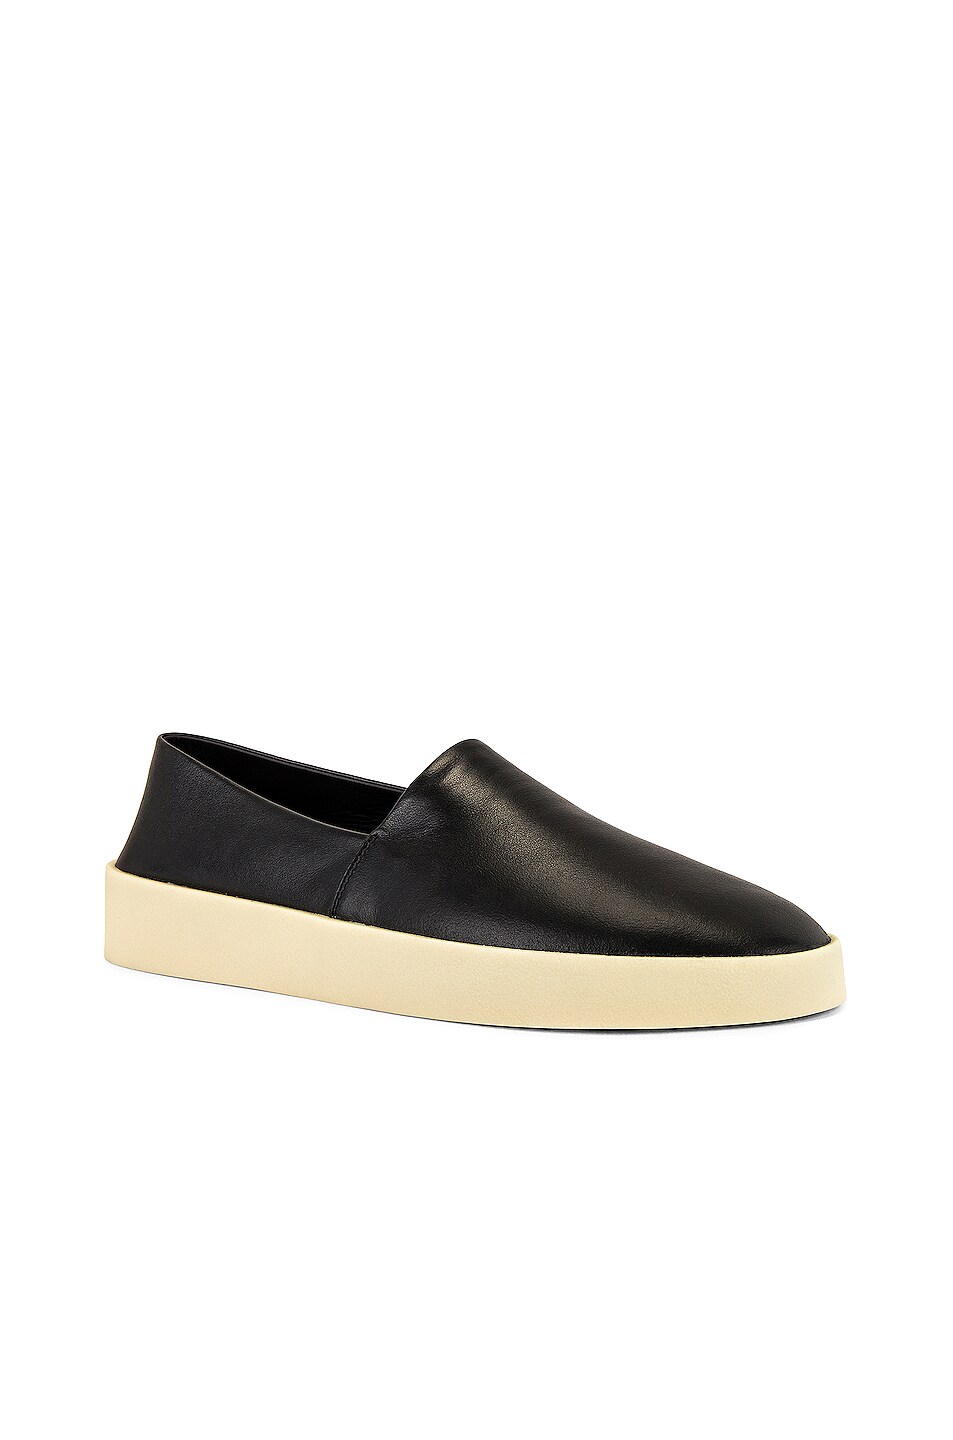 Image 1 of Fear of God Exclusively for Ermenegildo Zegna Calf Leather Espadrille in Black